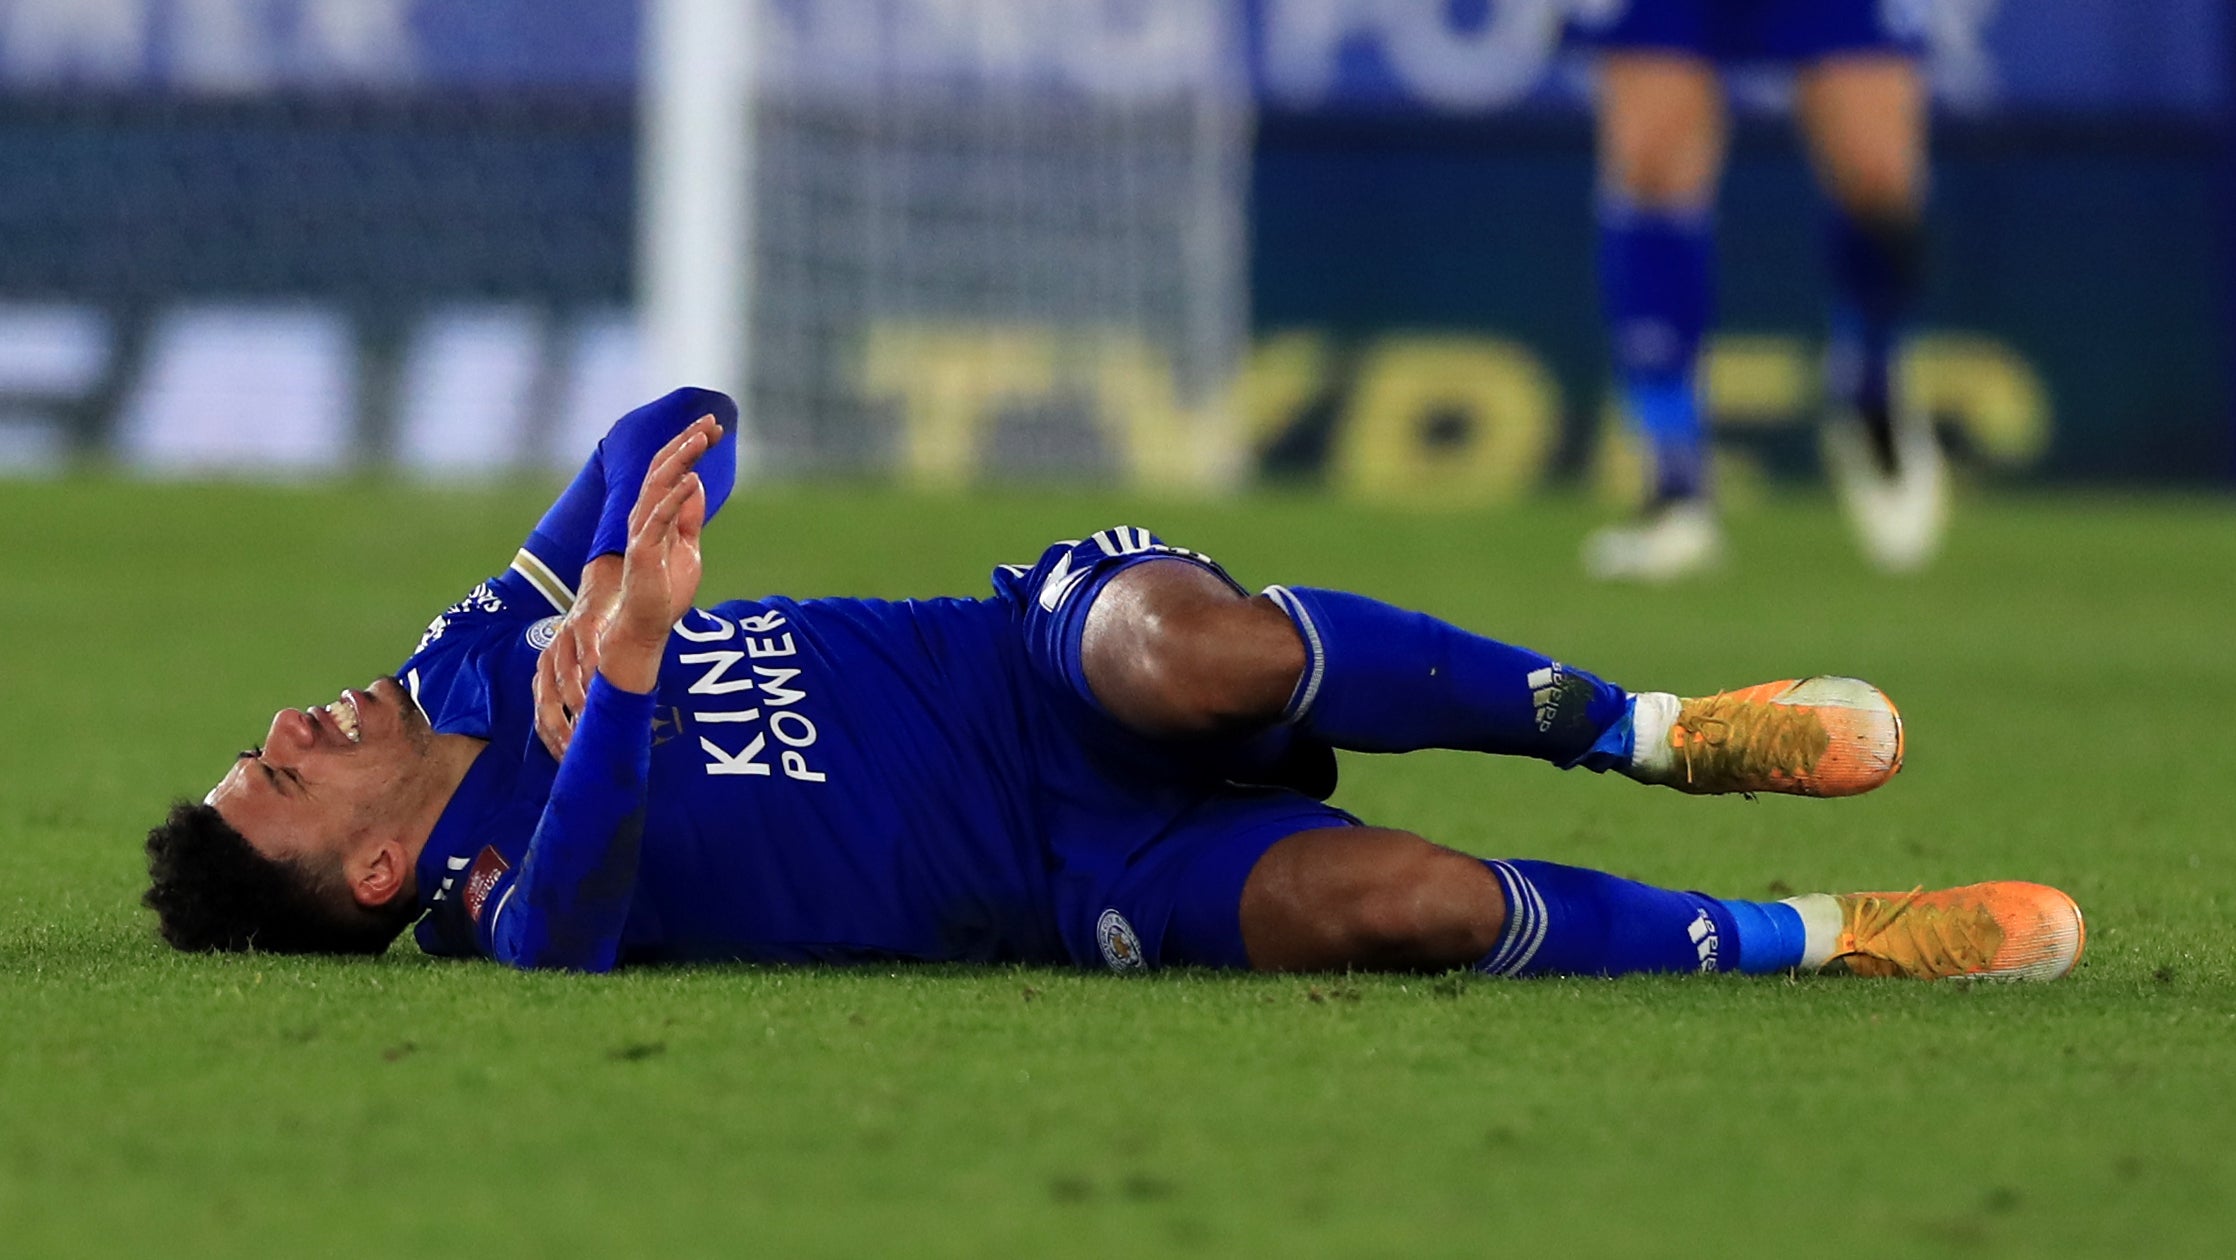 James Justin was injured during an FA Cup match between Leicester and Brighton in February 2021 (Mike Egerton/PA)